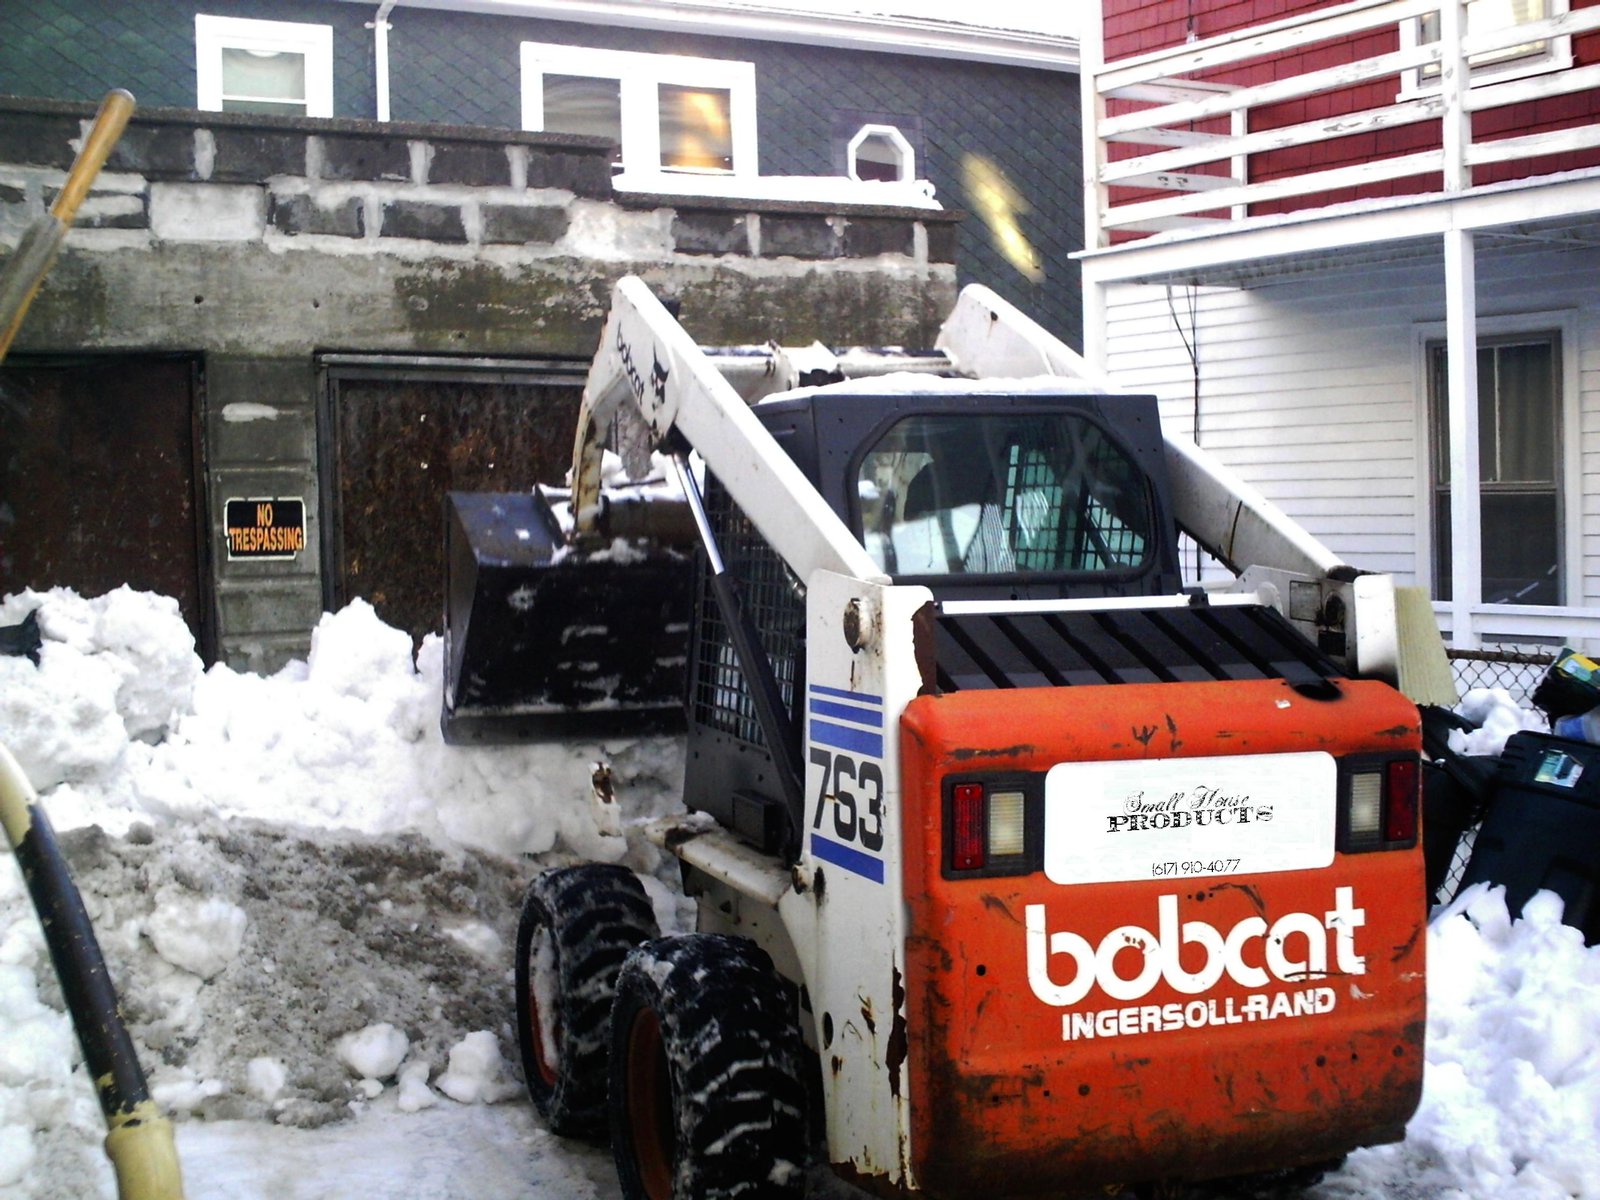 Bringing' out the bobcat for tommorows sesh